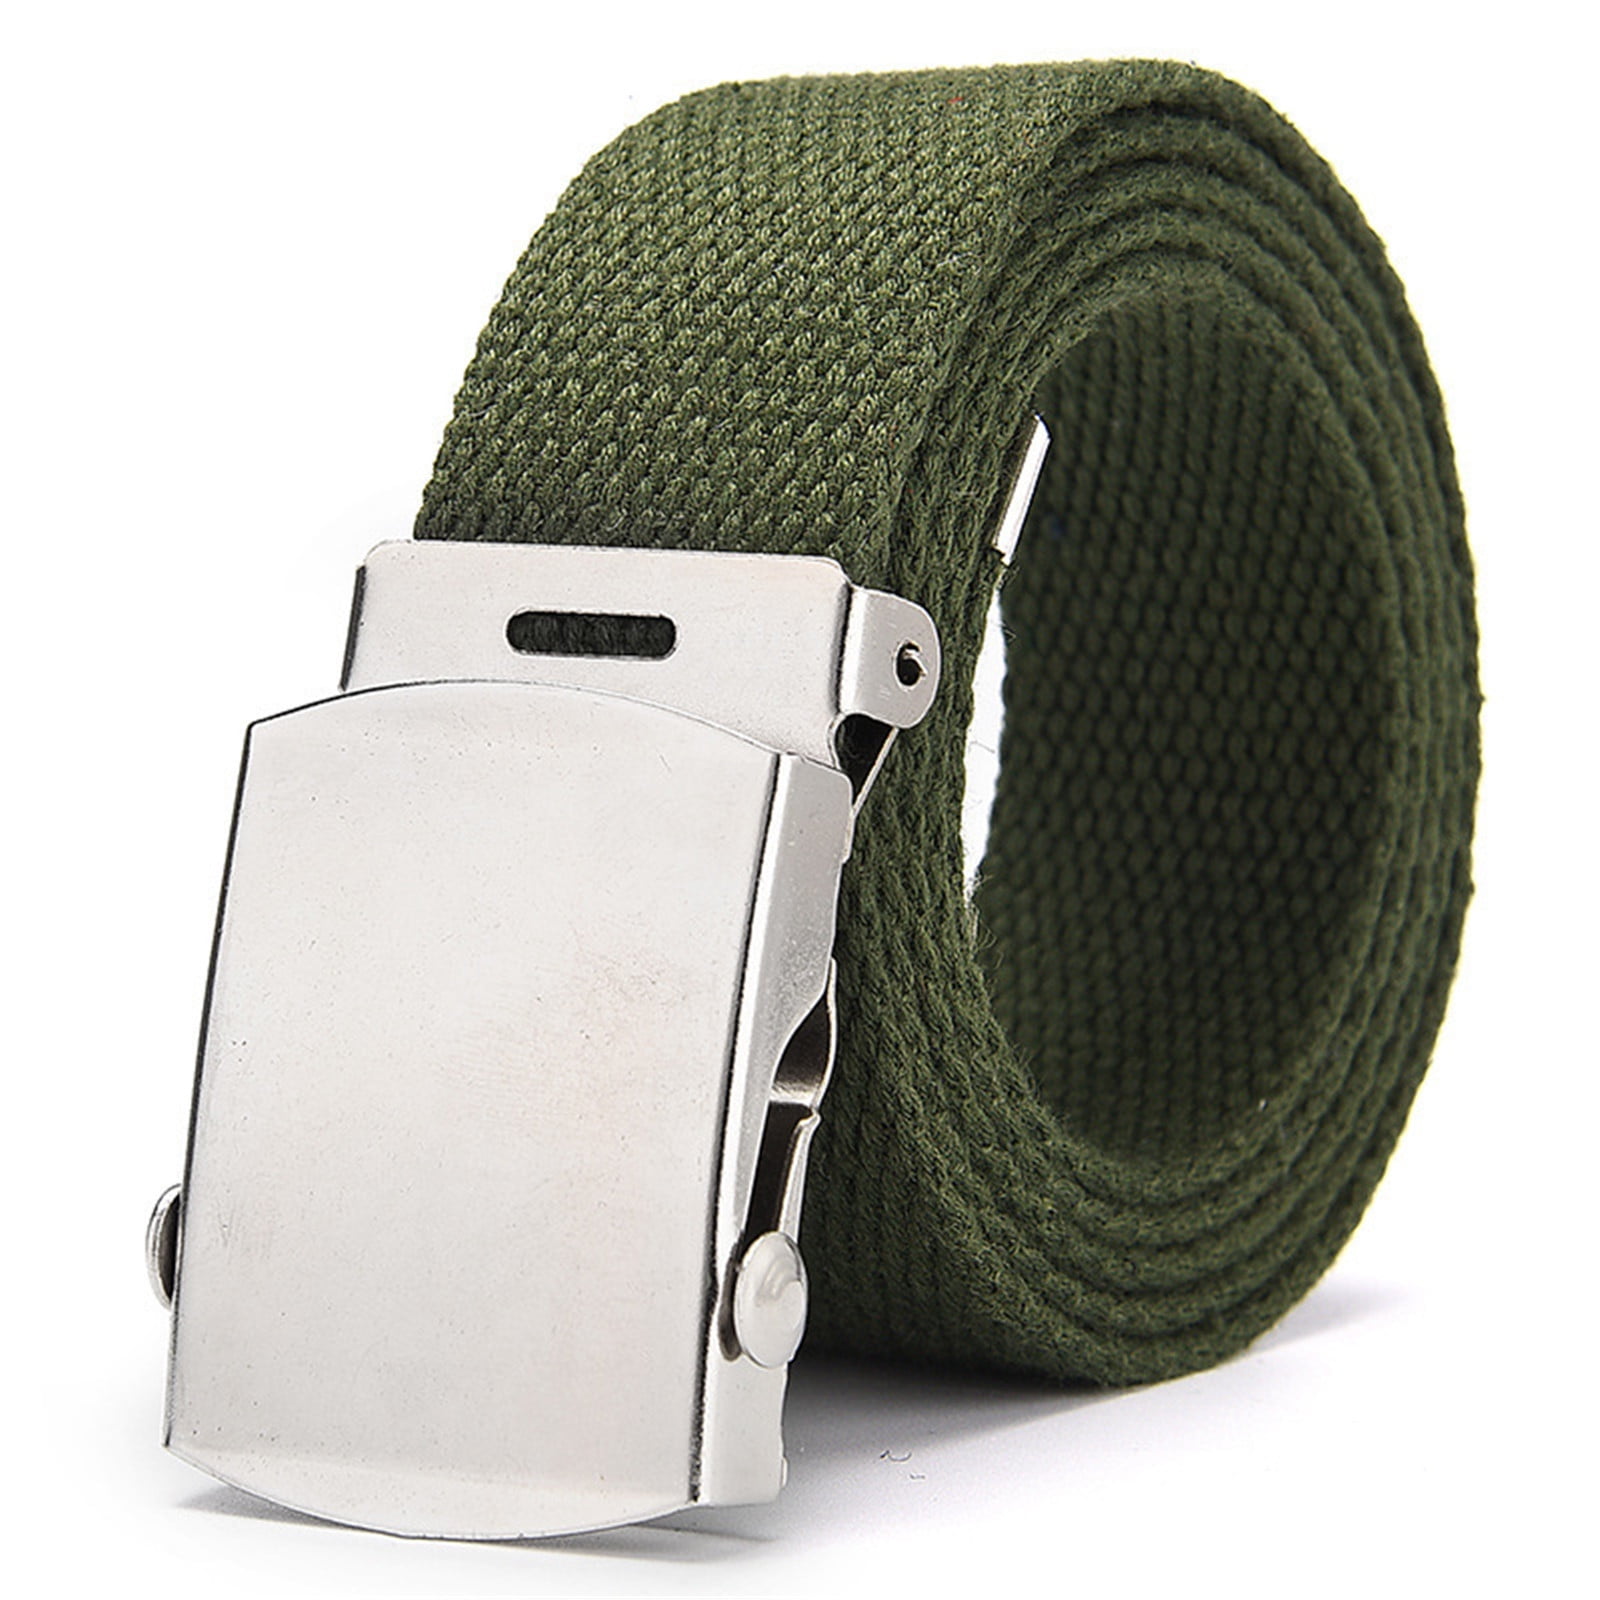 1-1/2 " 38mm Metal Belt Buckles Side Release Tactical Military Straps Girdle